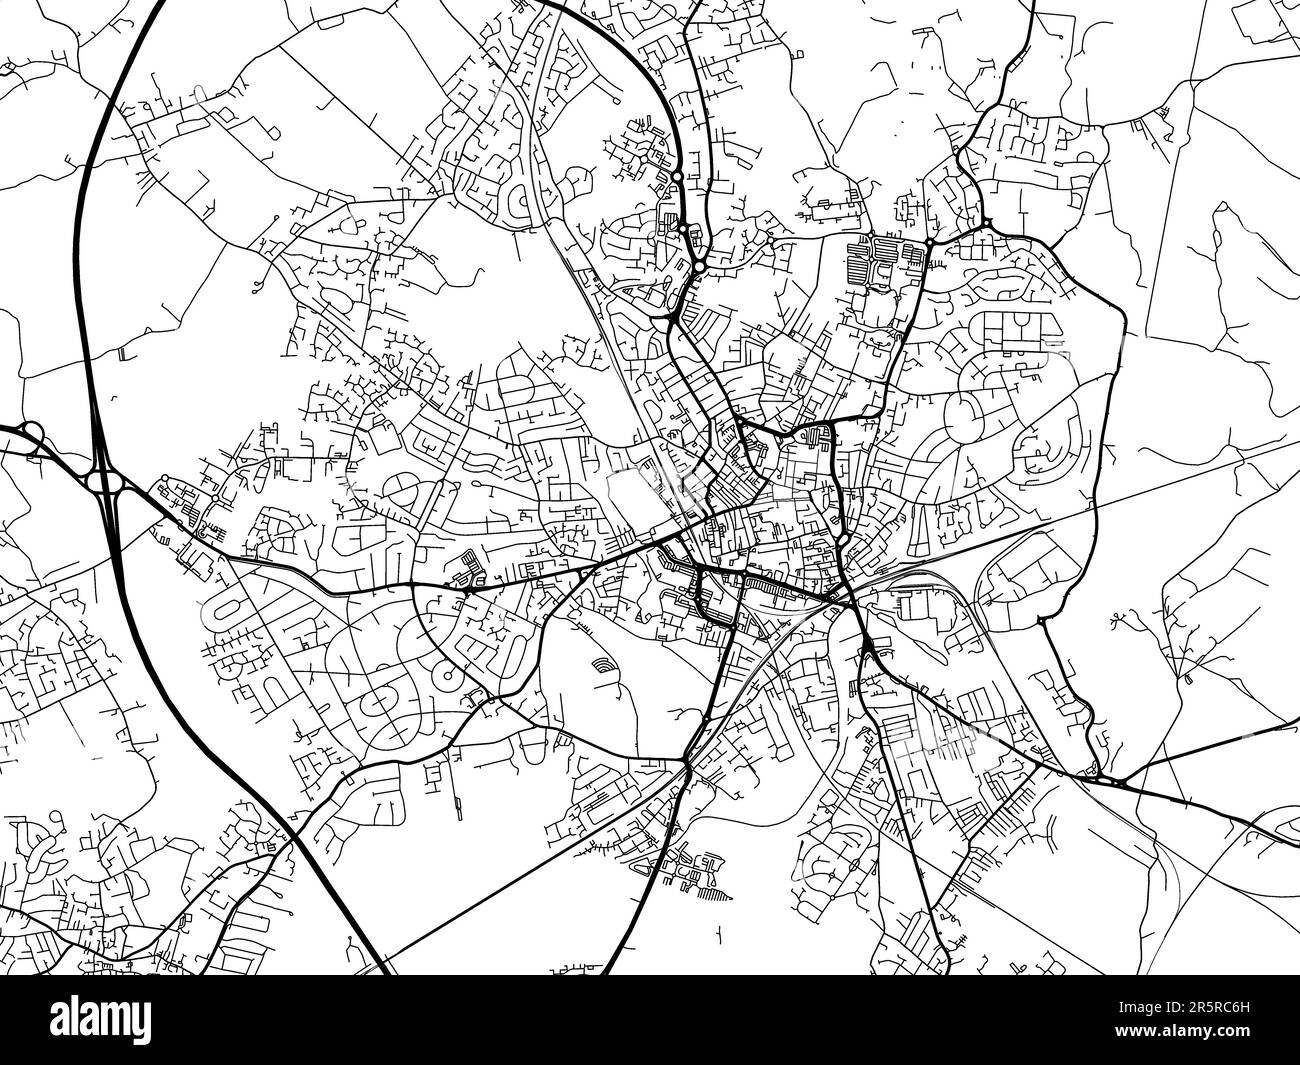 Road map of the city of  Wakefield in the United Kingdom on a white background. Stock Photo